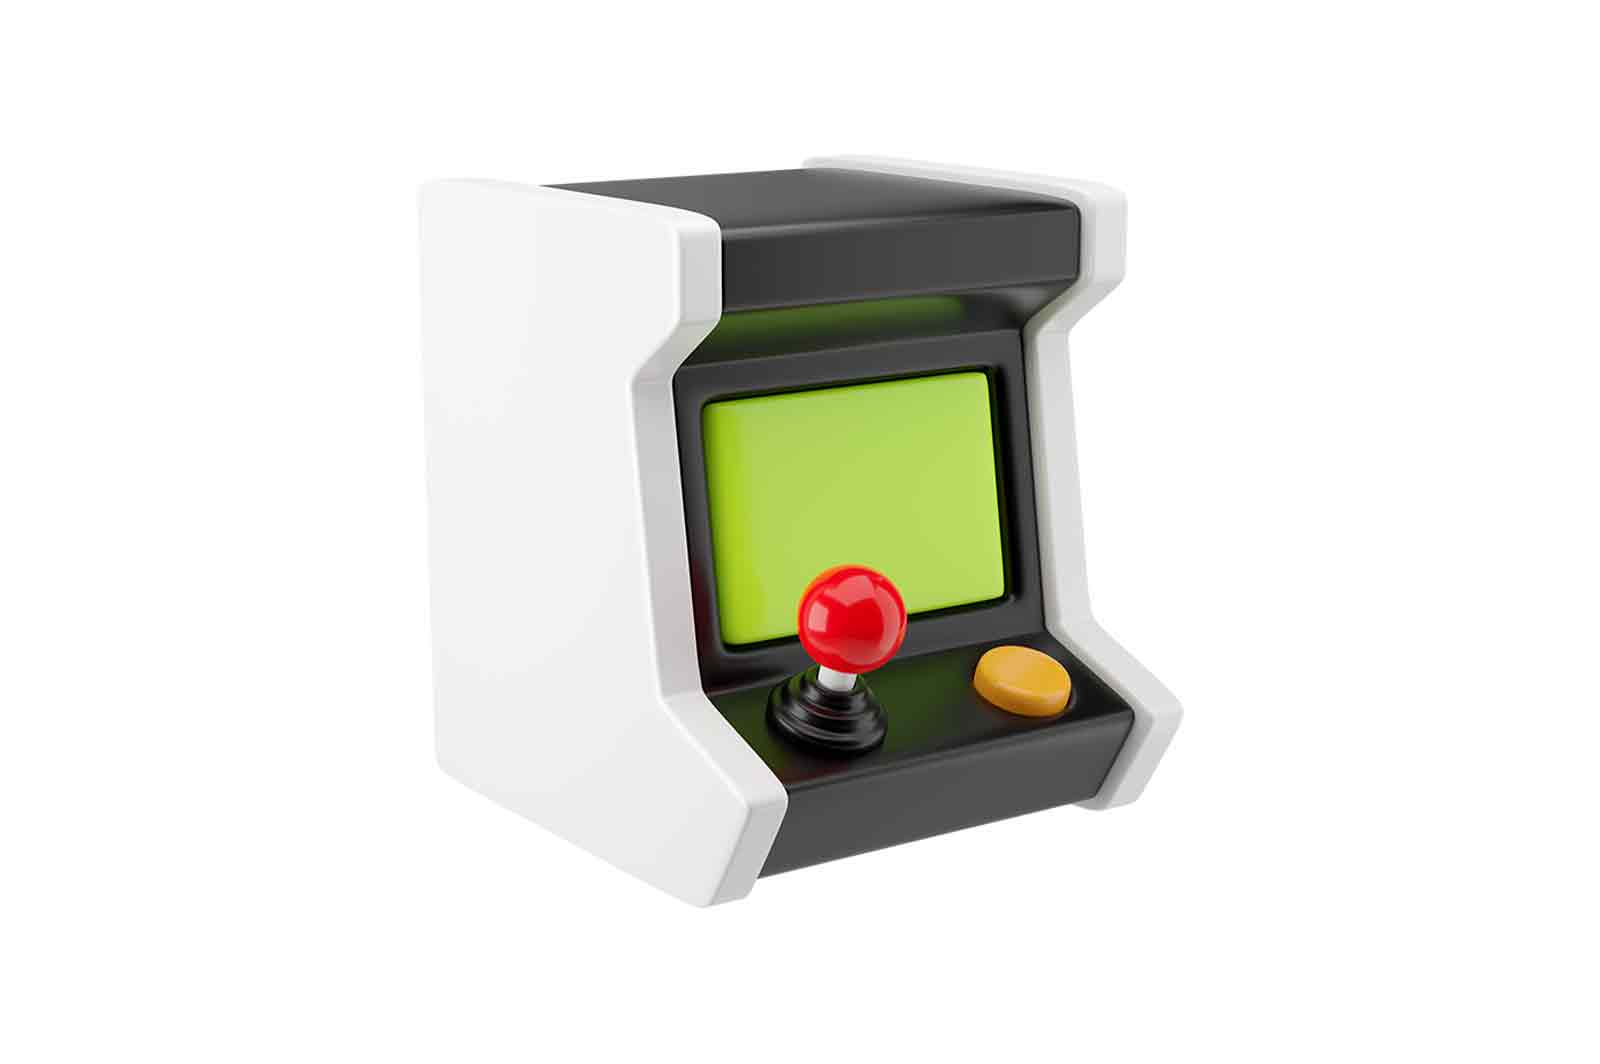 3D rendered illustration of mini arcade game machine. Green screen, red joystick, yellow button. isolated on white background.